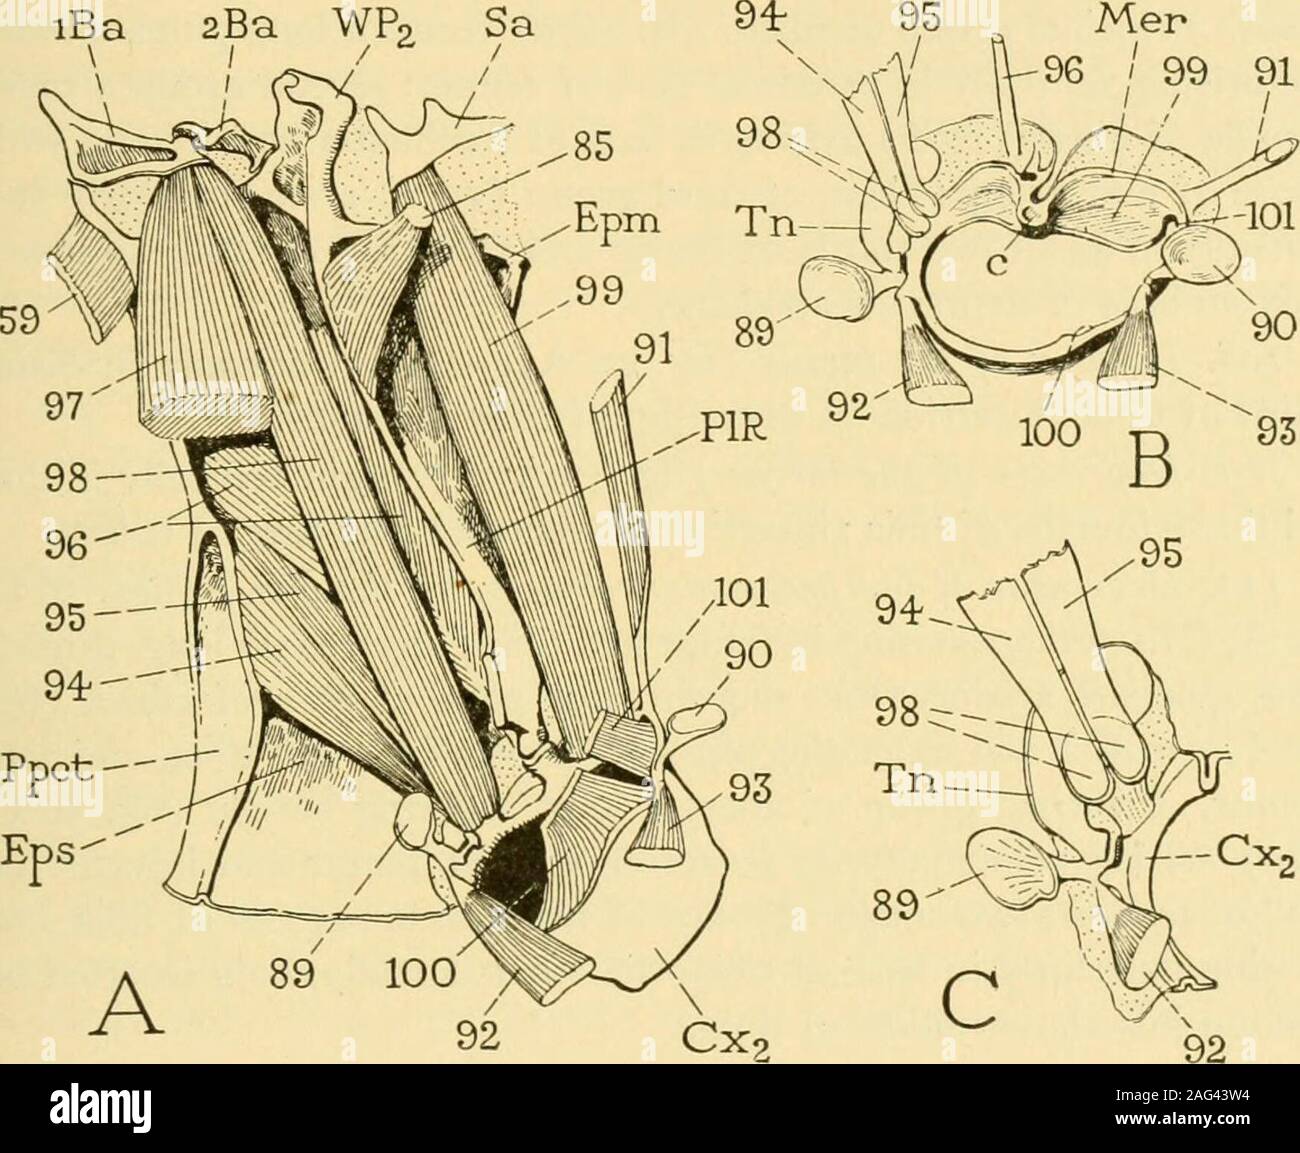 . Smithsonian miscellaneous collections. apophysis ; inserted on posterior angle of coxa(A, B, loi) between attachments of po and pi. The telopodite of the middle leg, or that part of the limb beyondthe coxa, has the same musculature as the telopodite of the first leg;its muscles are the following: 102. Levator of the trochanter.—Origin dorsally in base of coxa;insertion on dorsal lip of base of trochanter. /oj. Depressor of the trochanter.—A five-branched muscle with allbranches inserted on a tongue-like apodeme arising from ventral lipof base of trochanter. Two branches arise ventrally in th Stock Photo